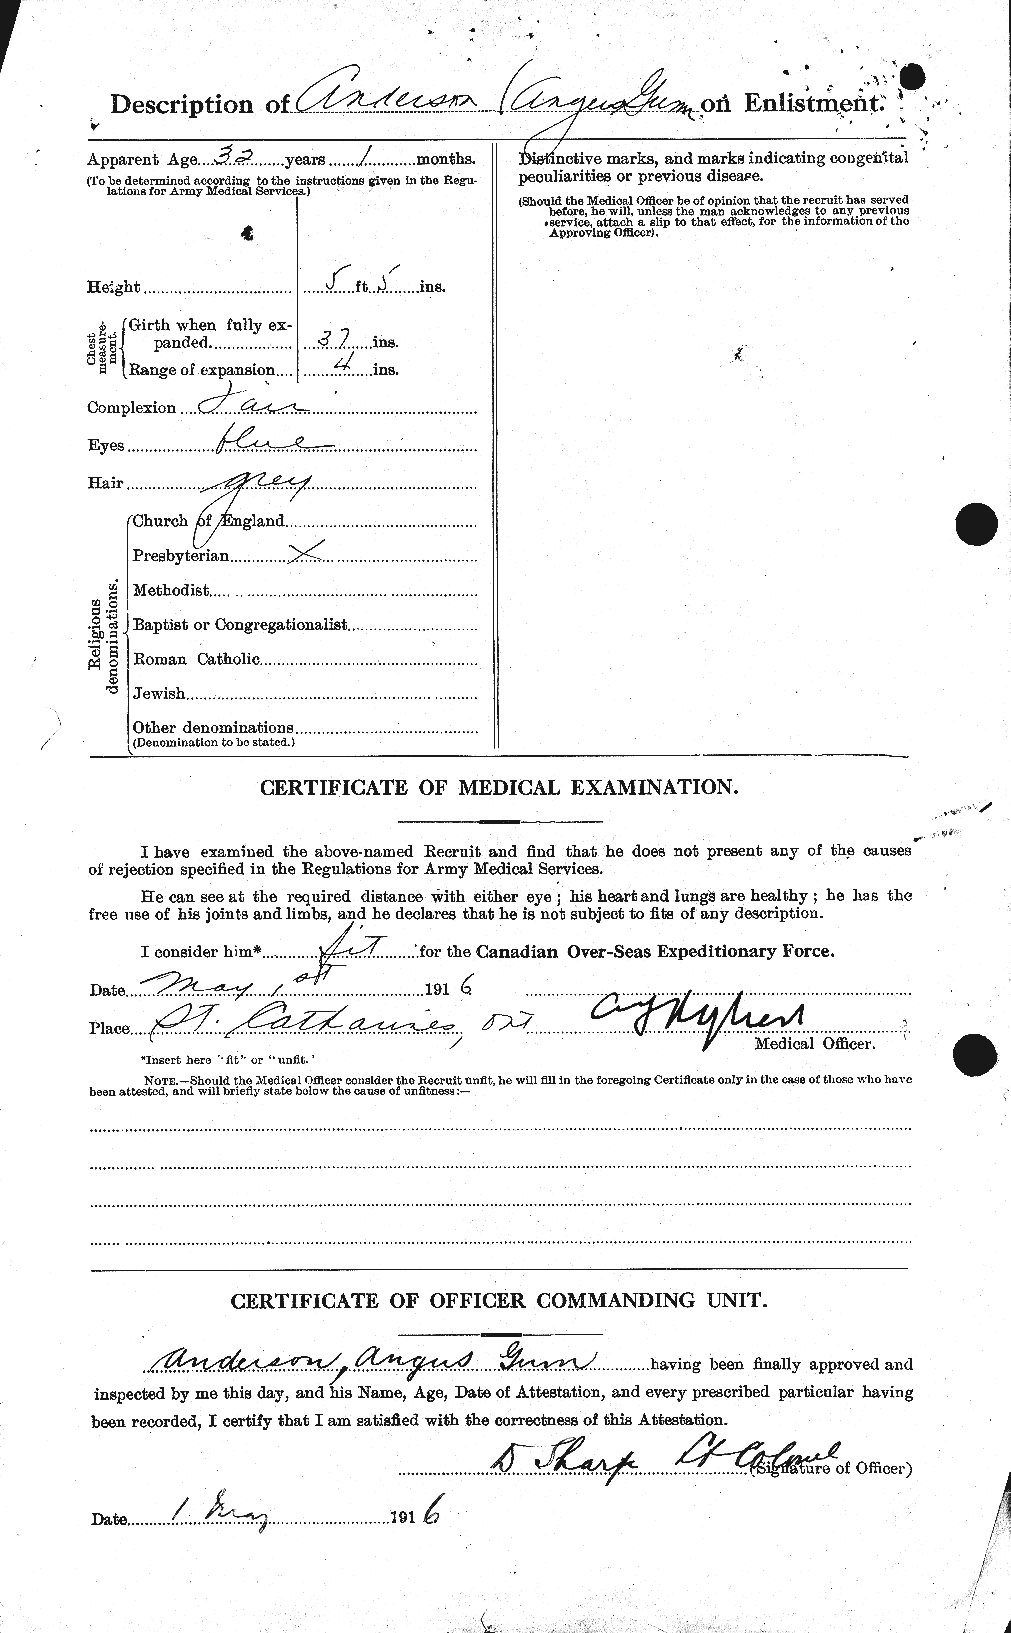 Personnel Records of the First World War - CEF 209390b